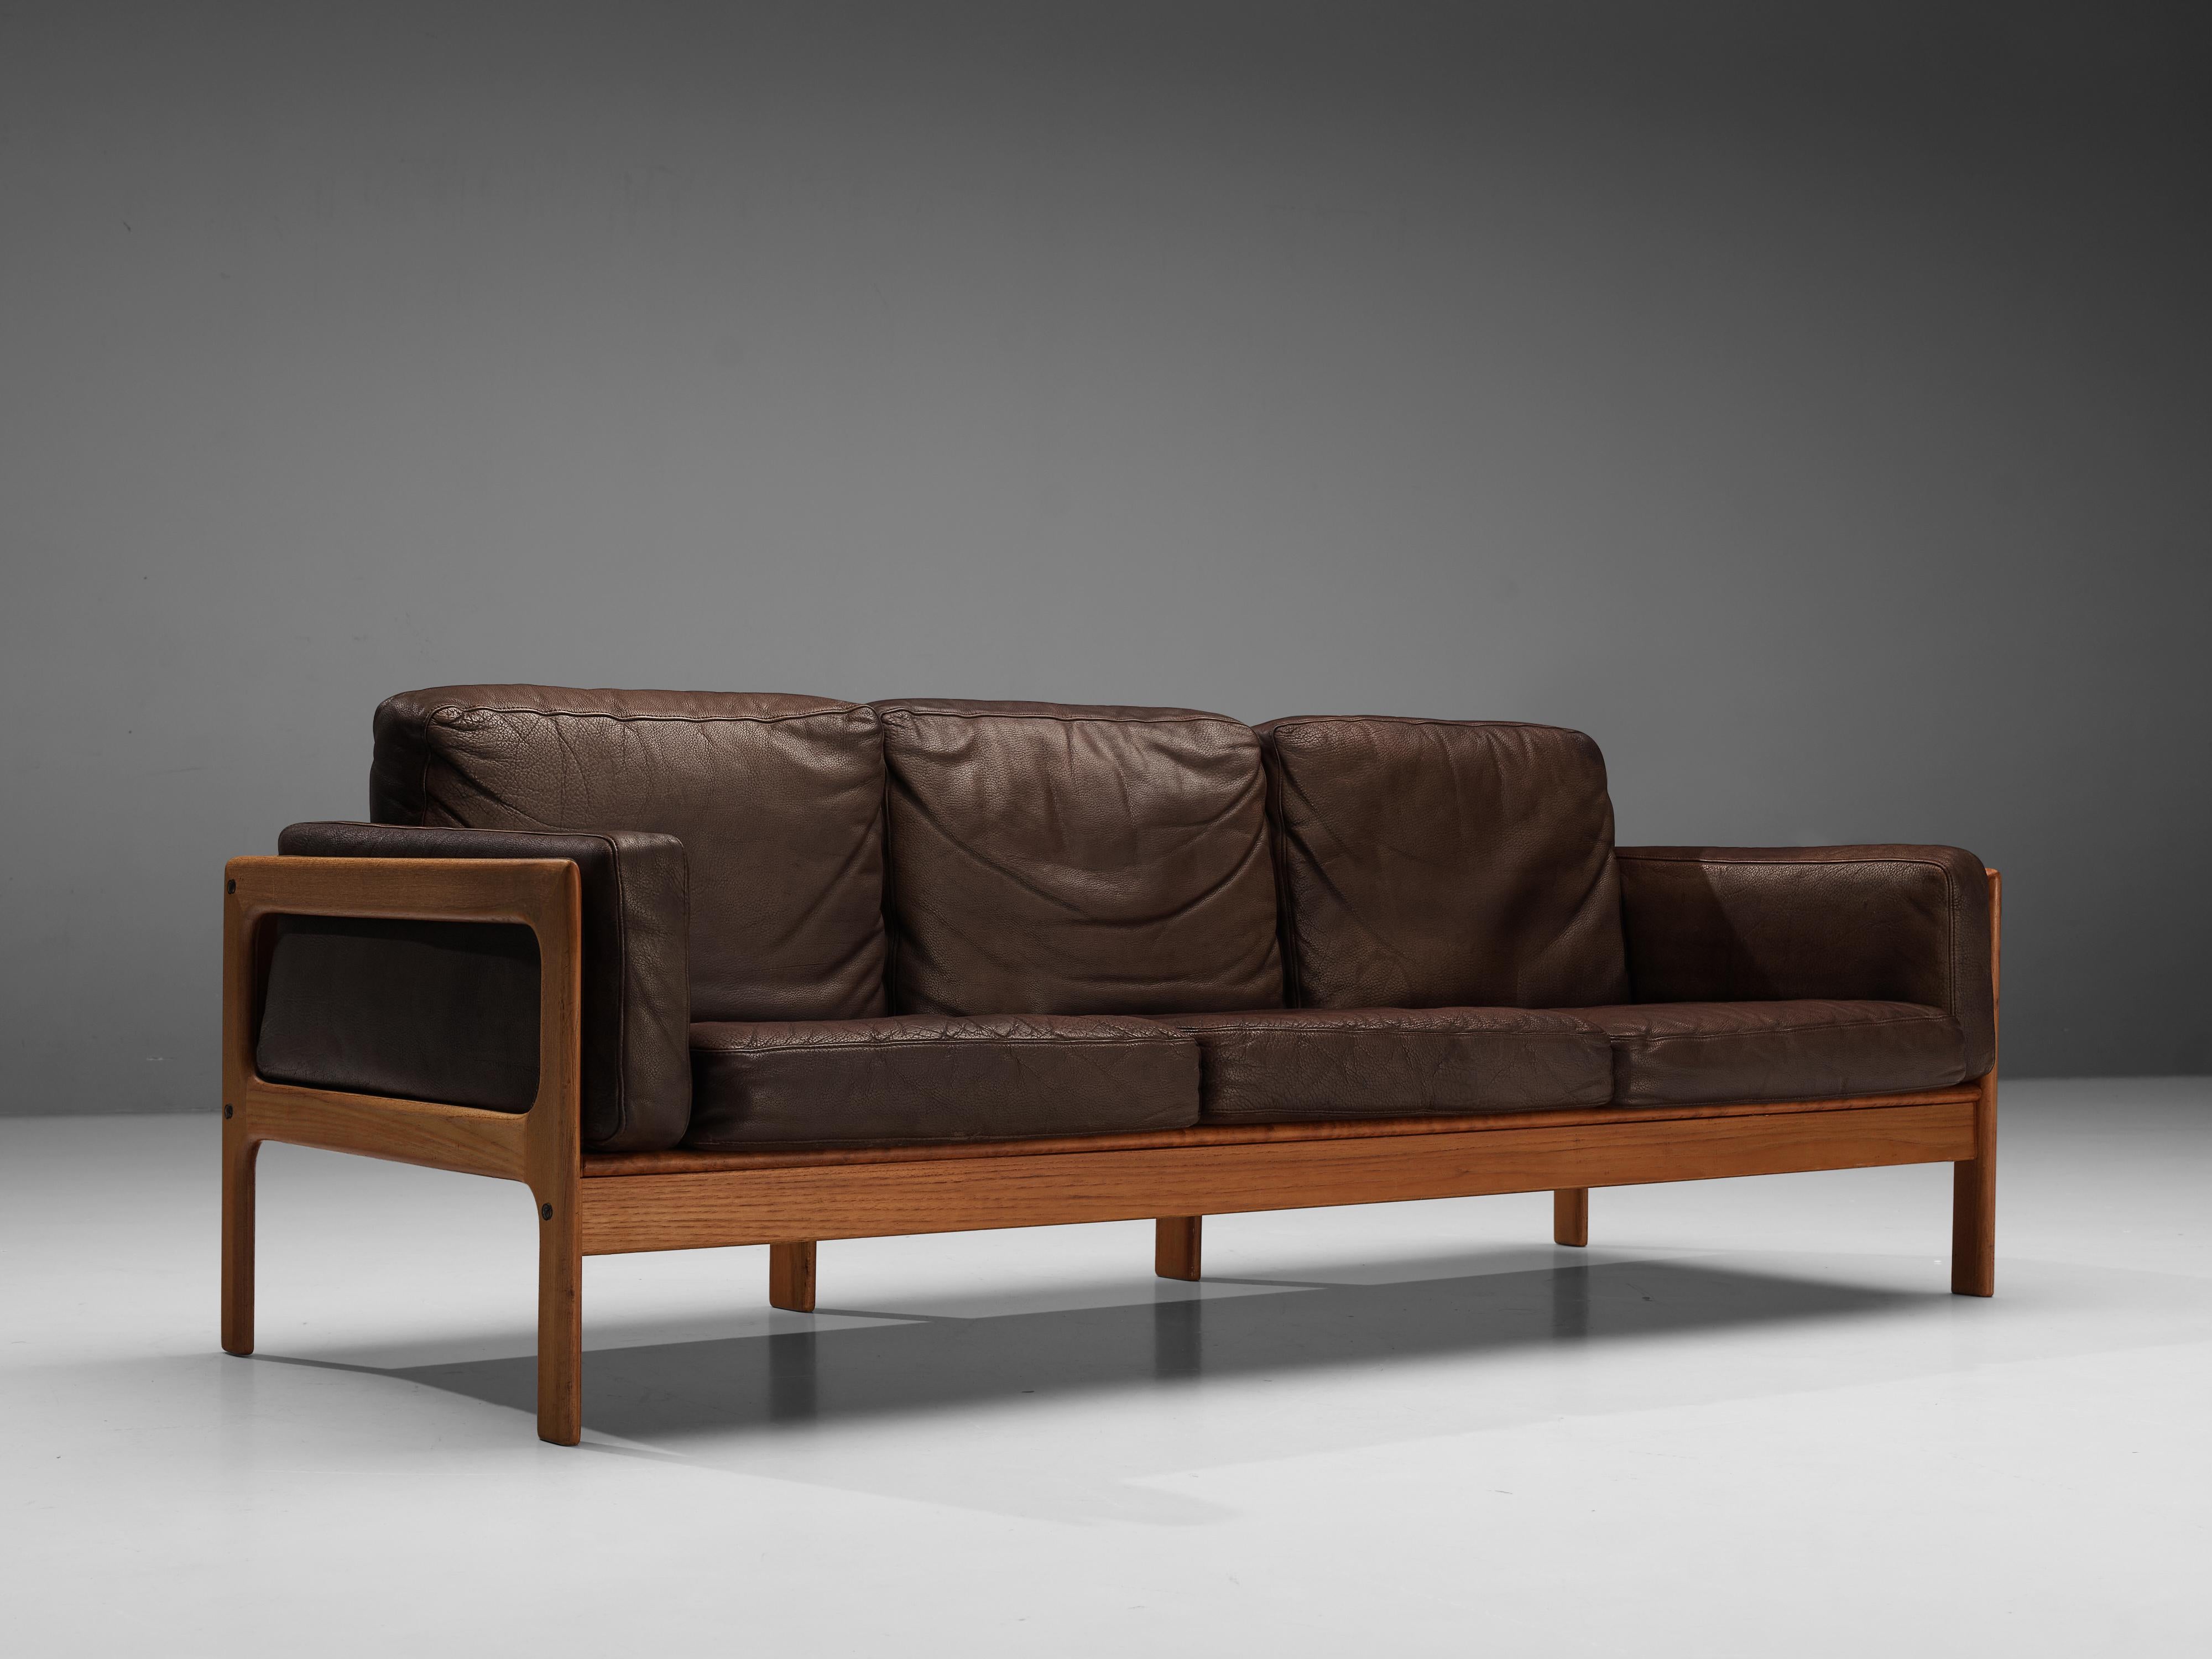 3-seat sofa, leather and stained oak, Denmark 1960s. 

Sturdy Danish sofa in brown leather. This sofa has an inviting, comfortable look while still being stylish. The very well-crafted wooden frame and legs fit perfectly with the brown leather,